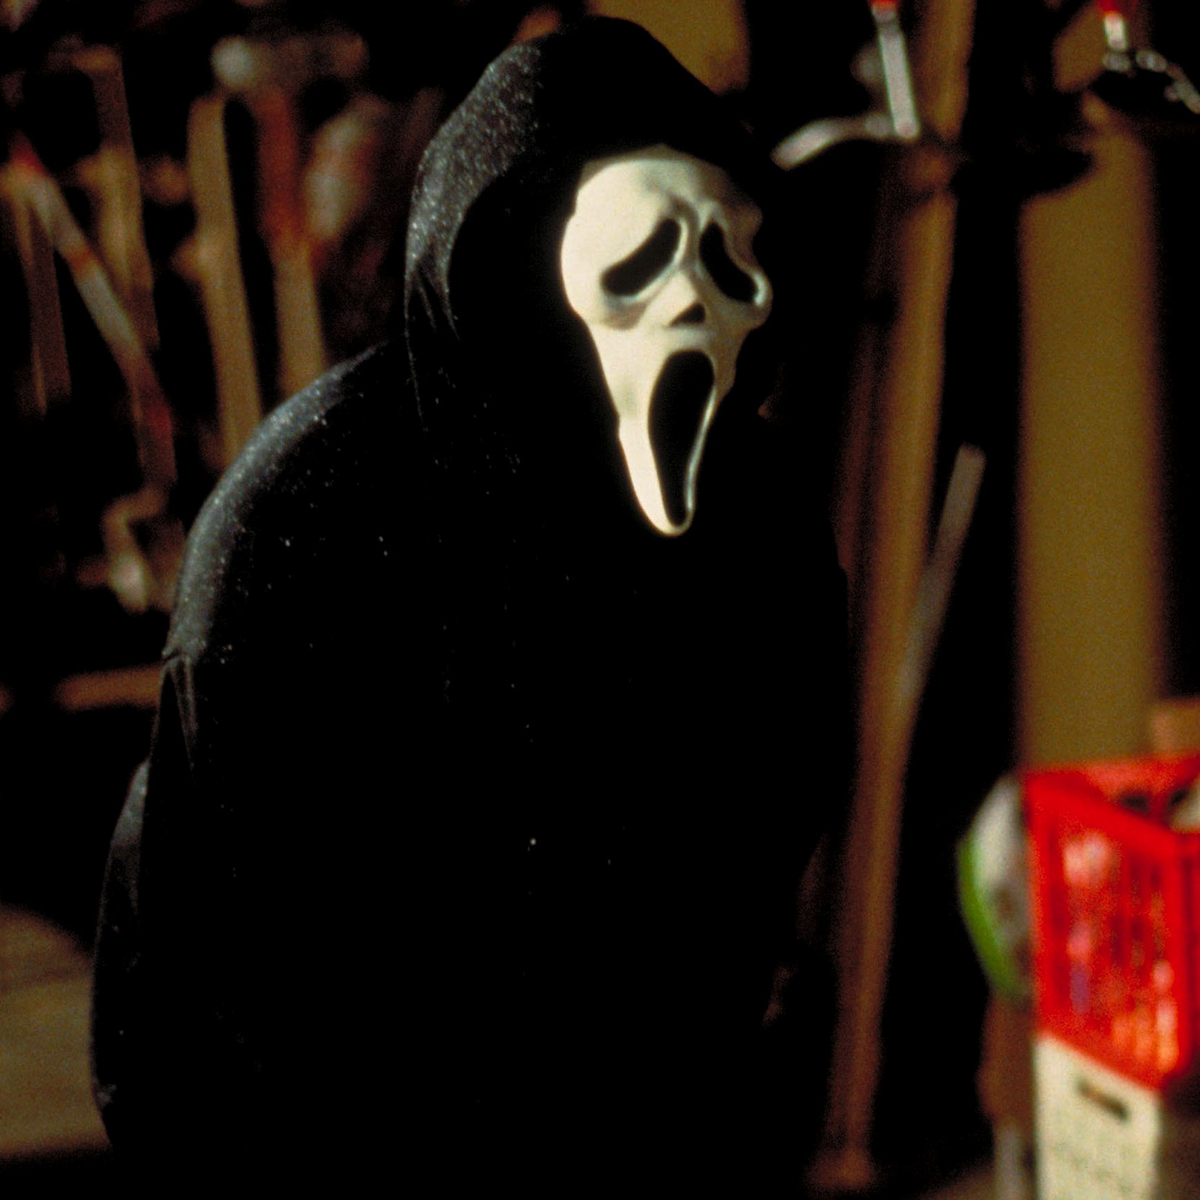 Scream 6: how the franchise is redefining horror years later - My